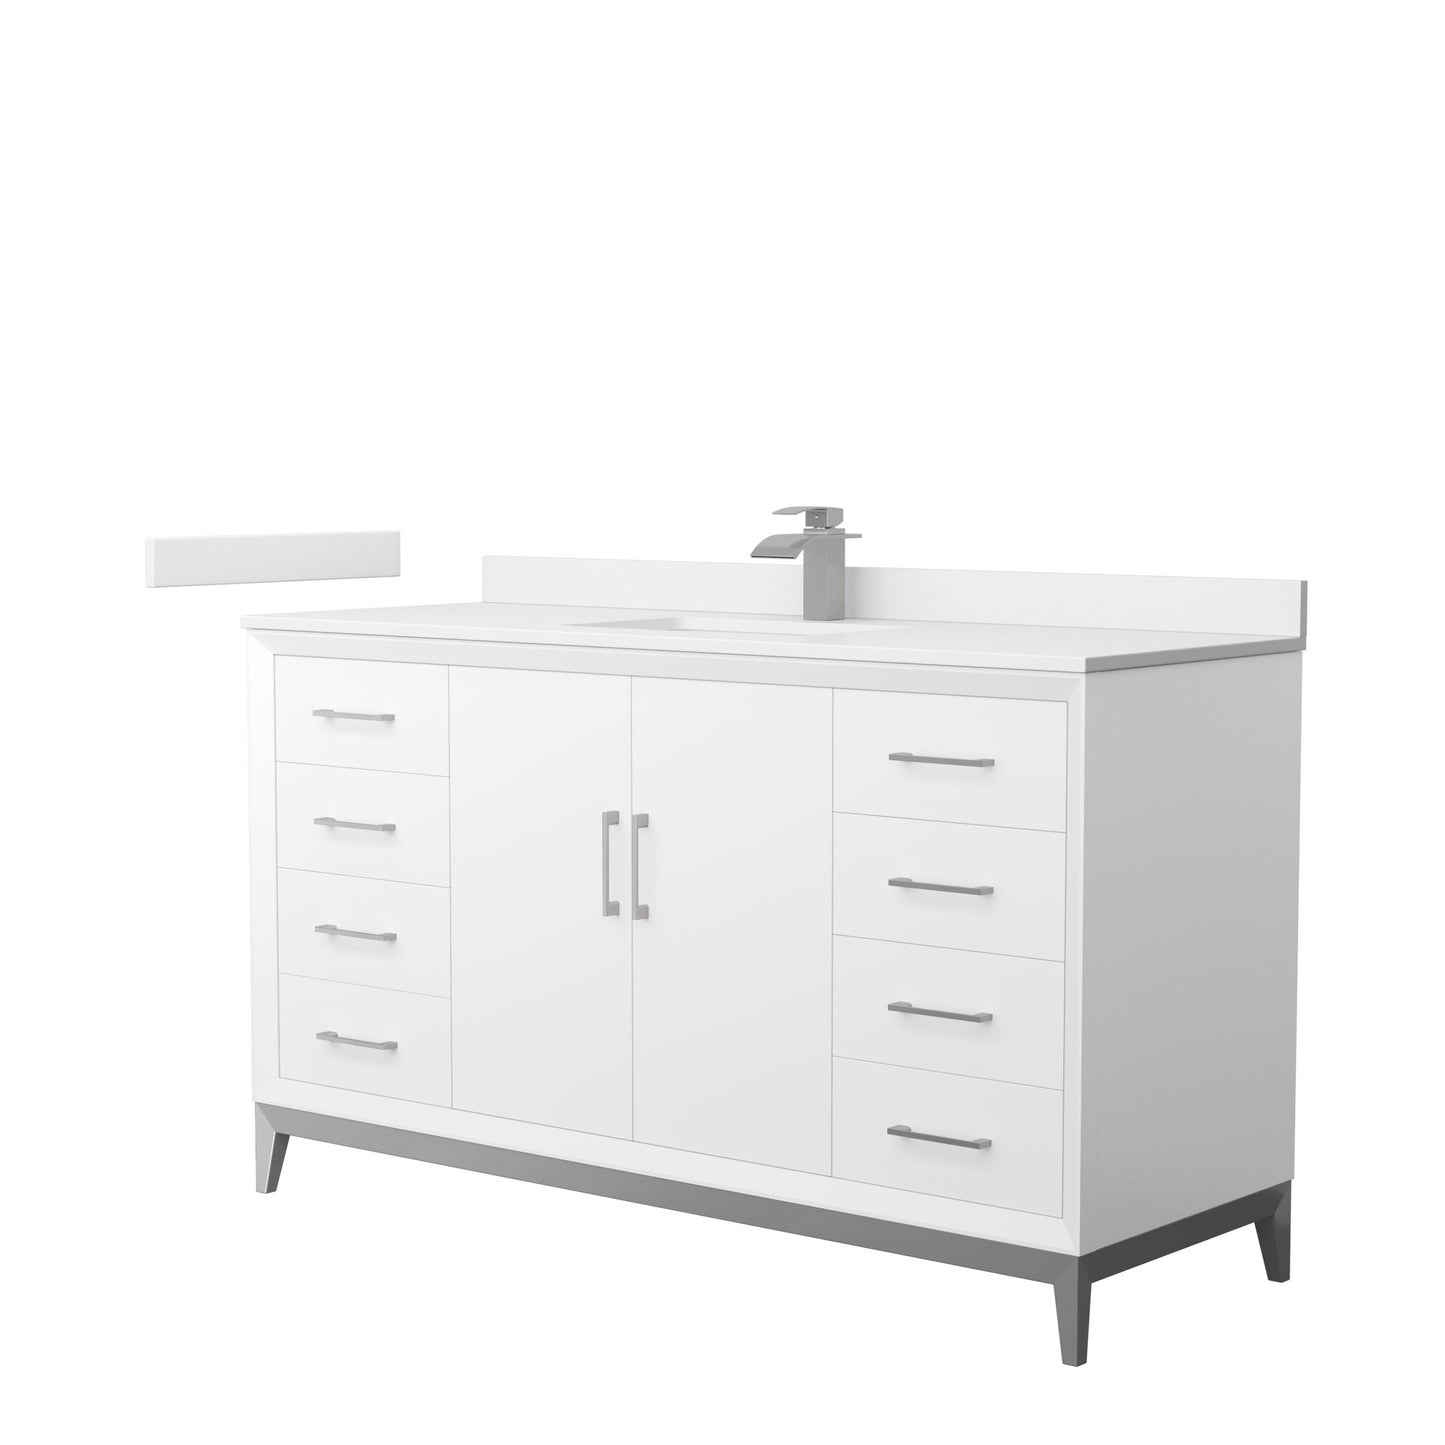 Wyndham Collection Amici 60" Single Bathroom Vanity in White, White Cultured Marble Countertop, Undermount Square Sink, Brushed Nickel Trim